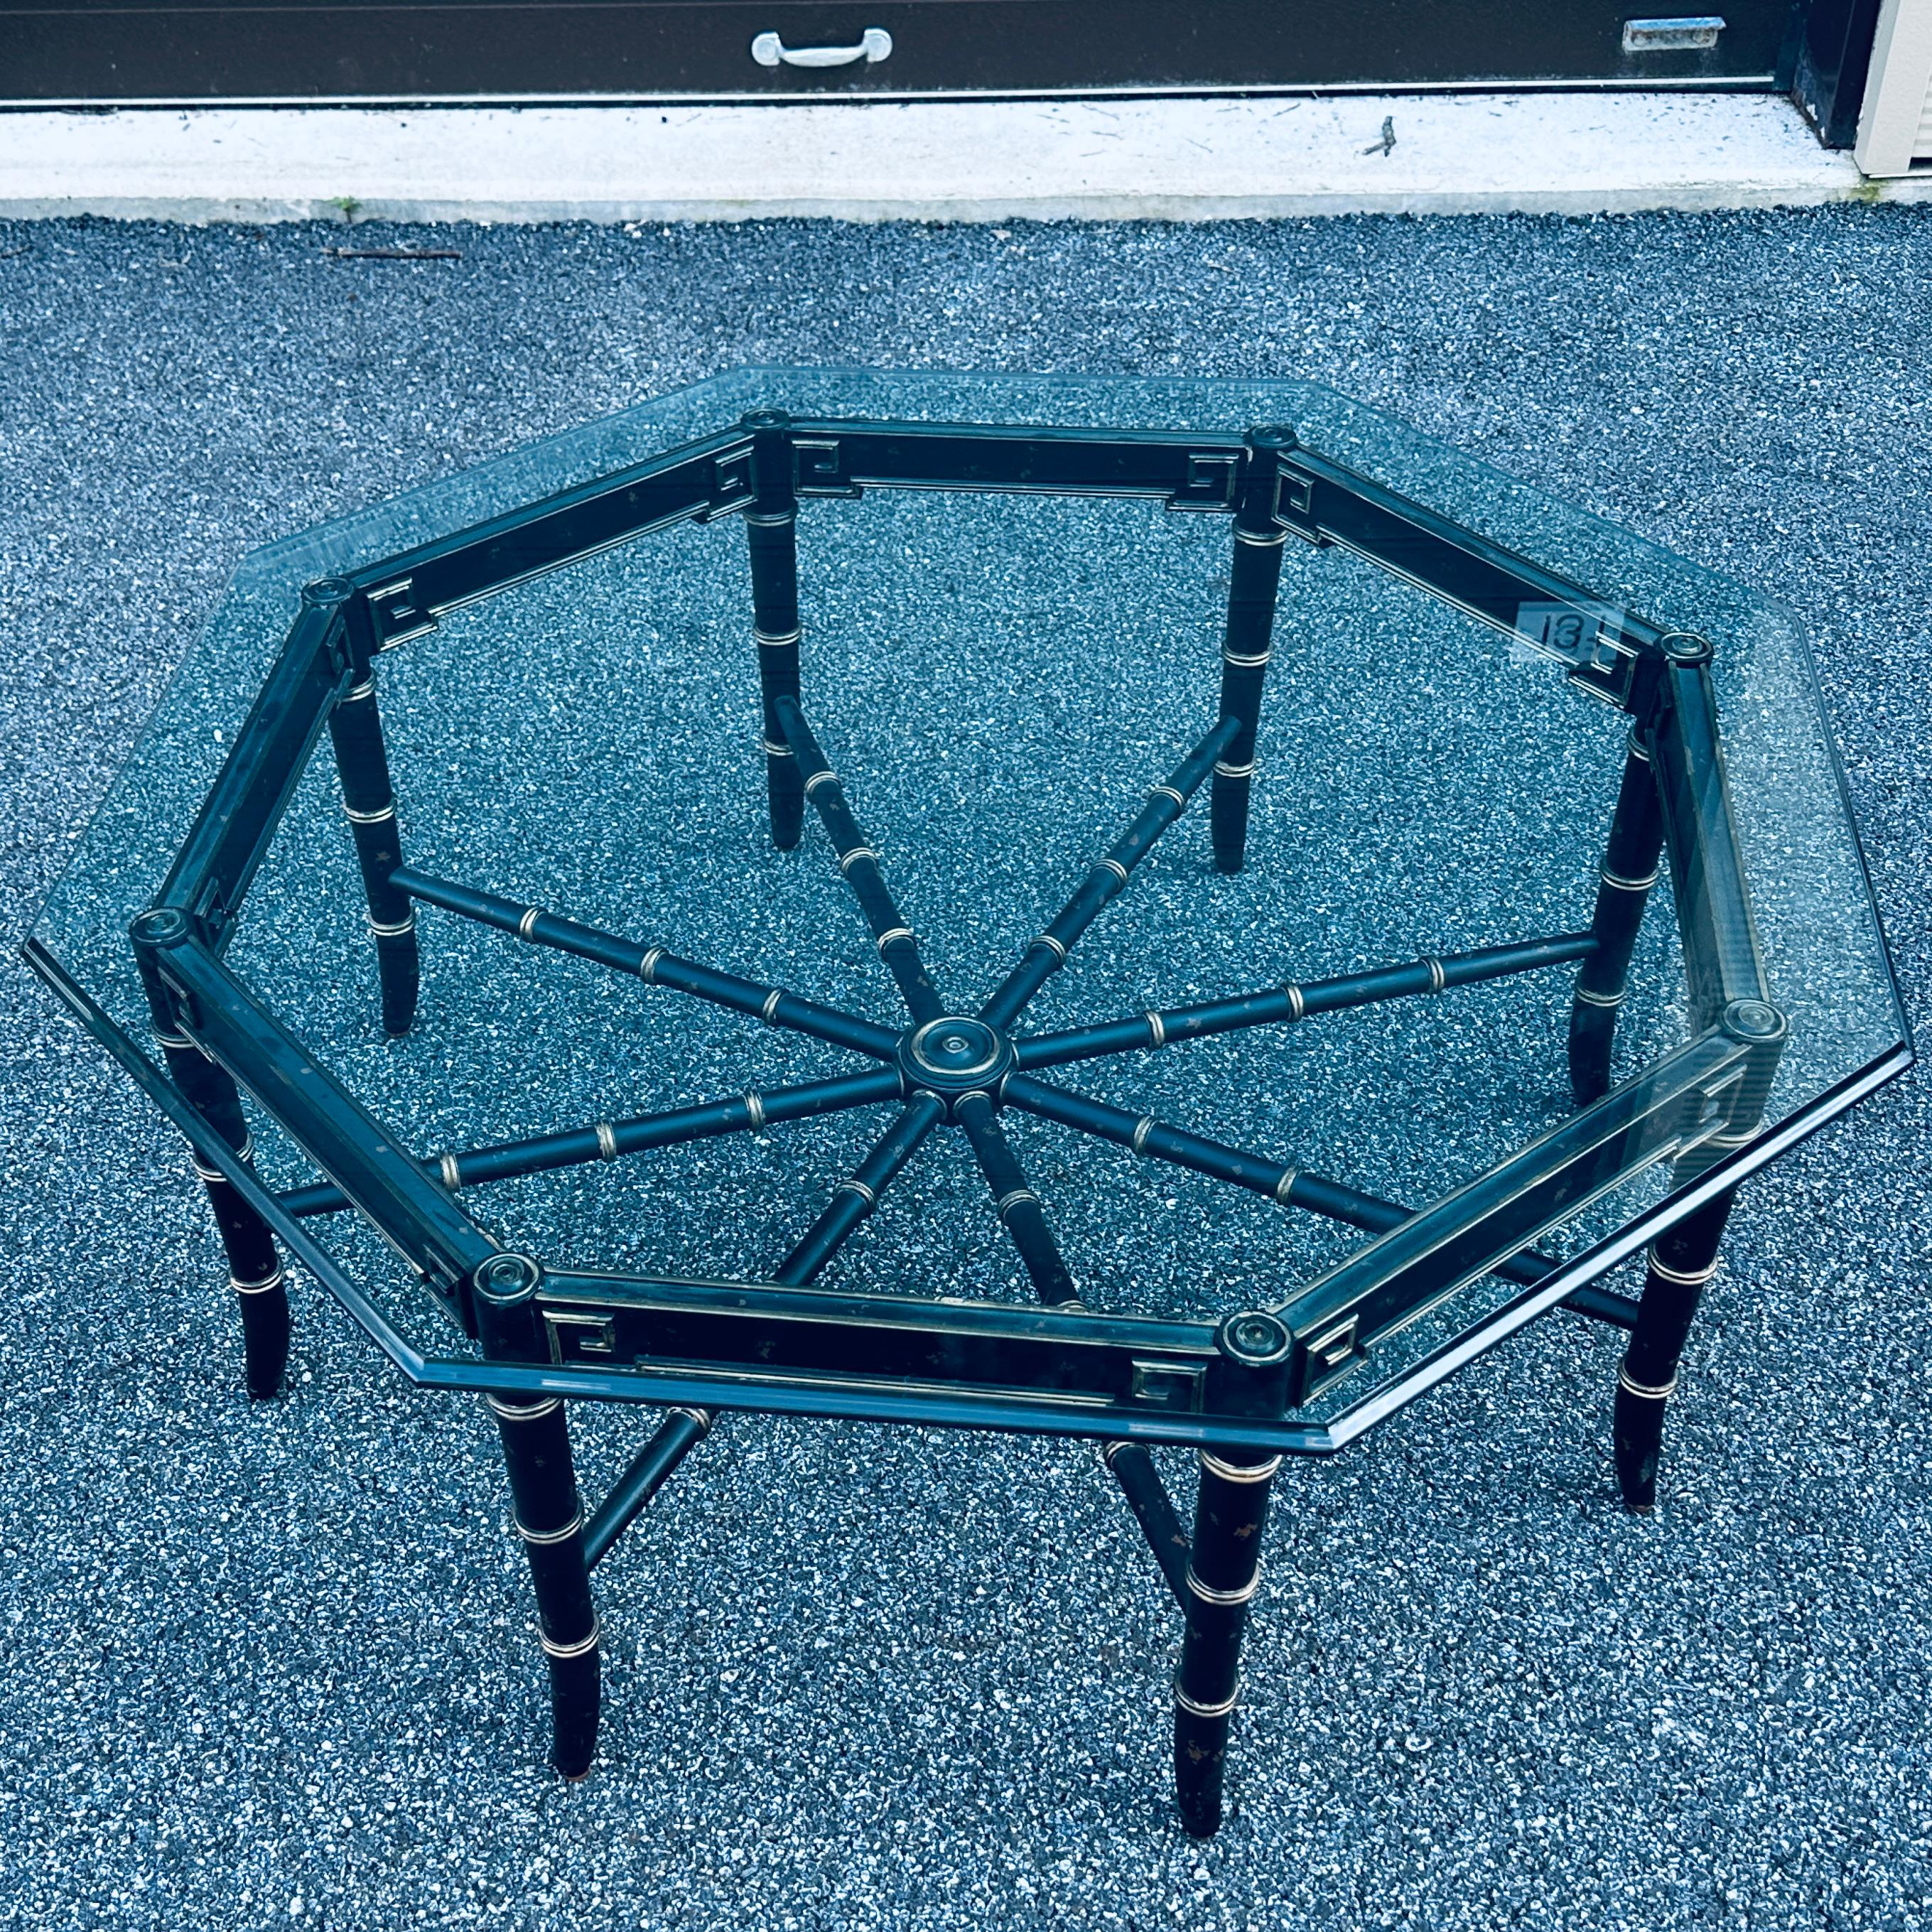 Regency style faux bamboo octagonal glass top cocktail table in a black and gold finish with intentional distressing throughout.
Base without glass measures roughly 38” x 38”